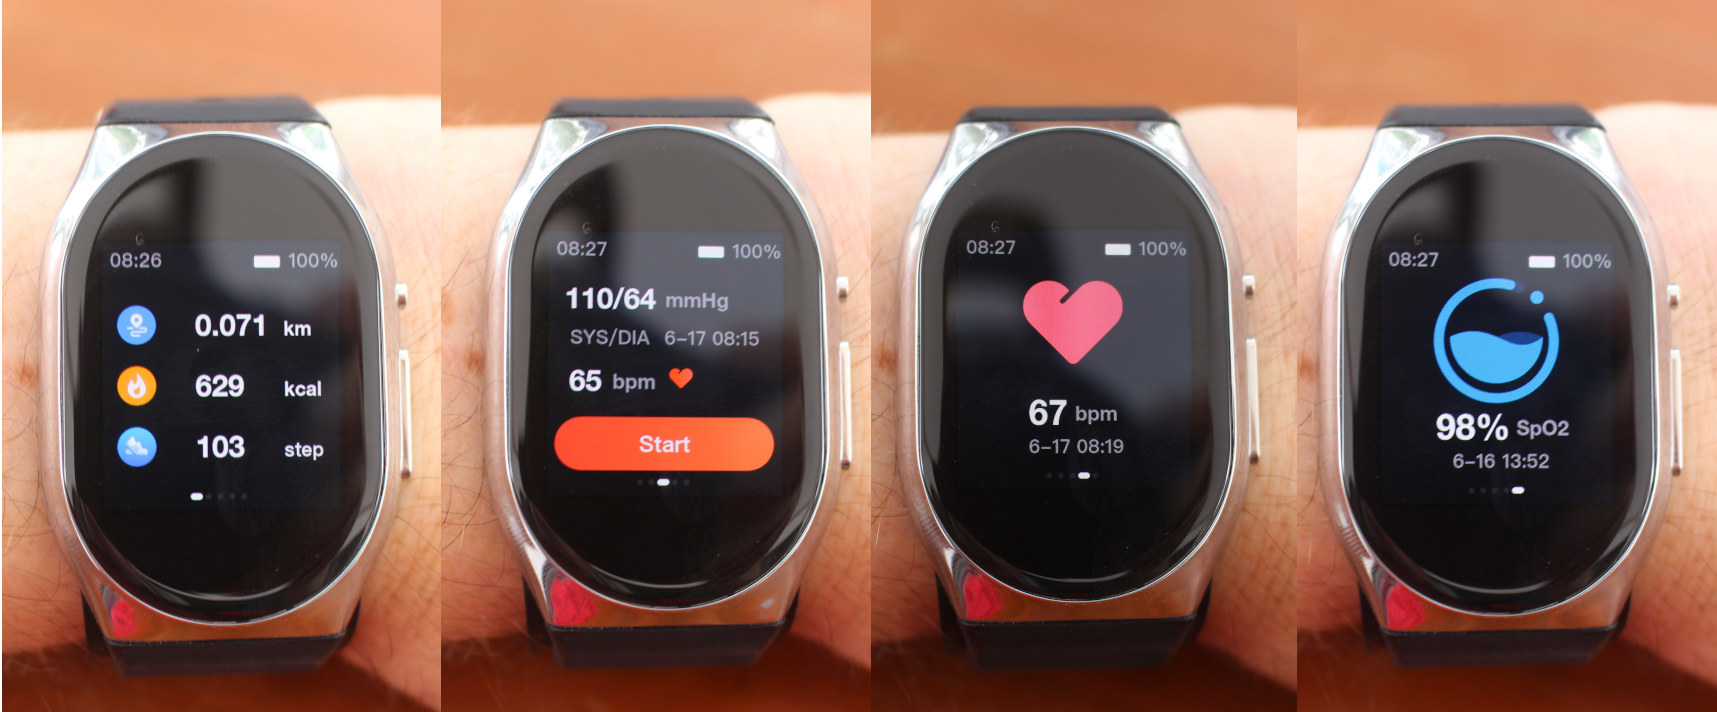 YHE BP Doctor Pro Review: A Microsoft Band Successor 